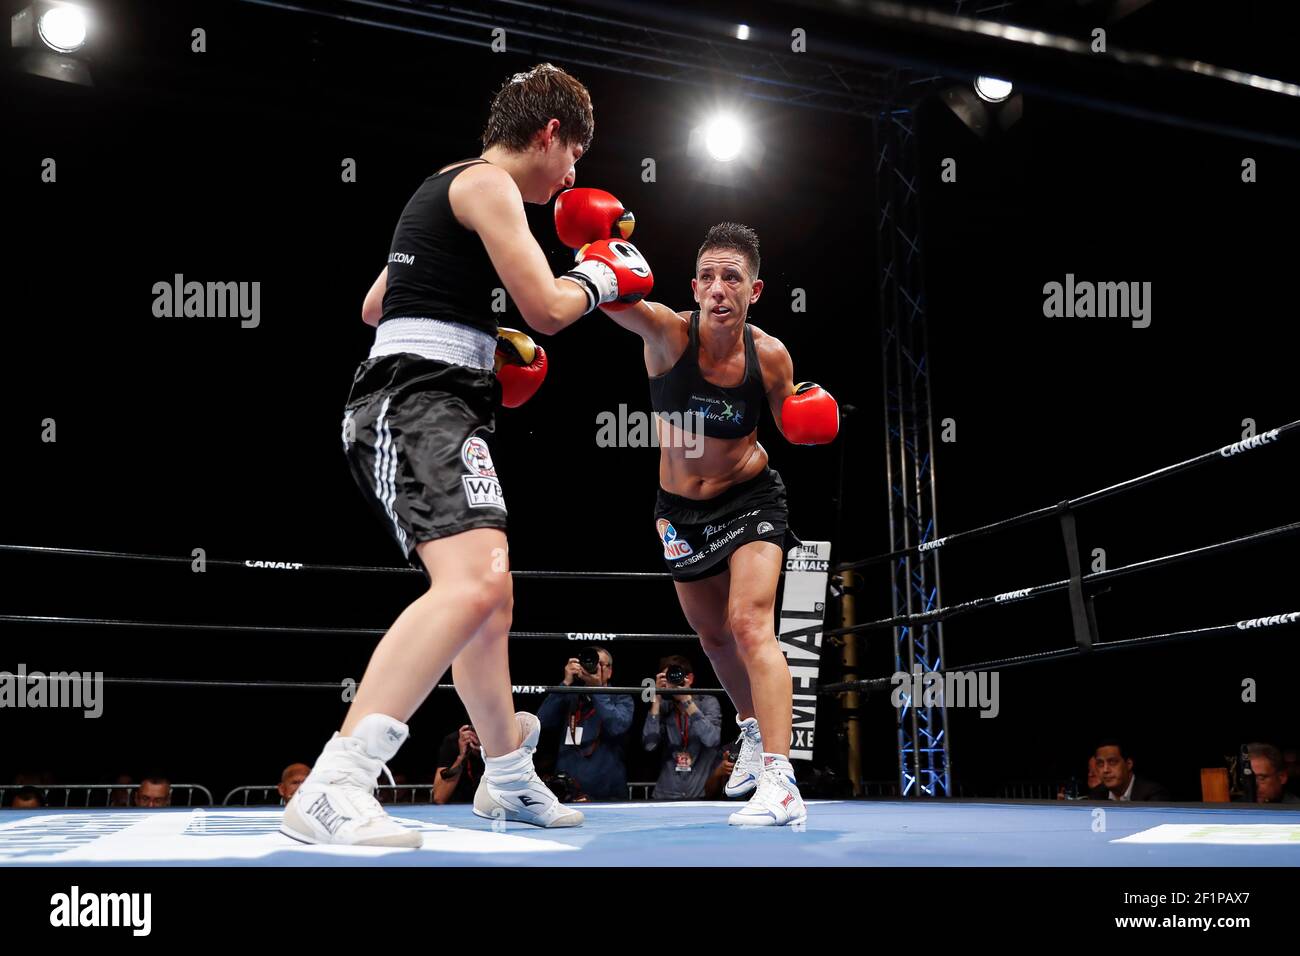 Myriam Dellal (FRA) won against Elfi Philips (BEL) and became world  champion of WBC Silver during the Boxing international event at Issy les  Moulineaux, Palais des Sports Robert charpentier, France, on October